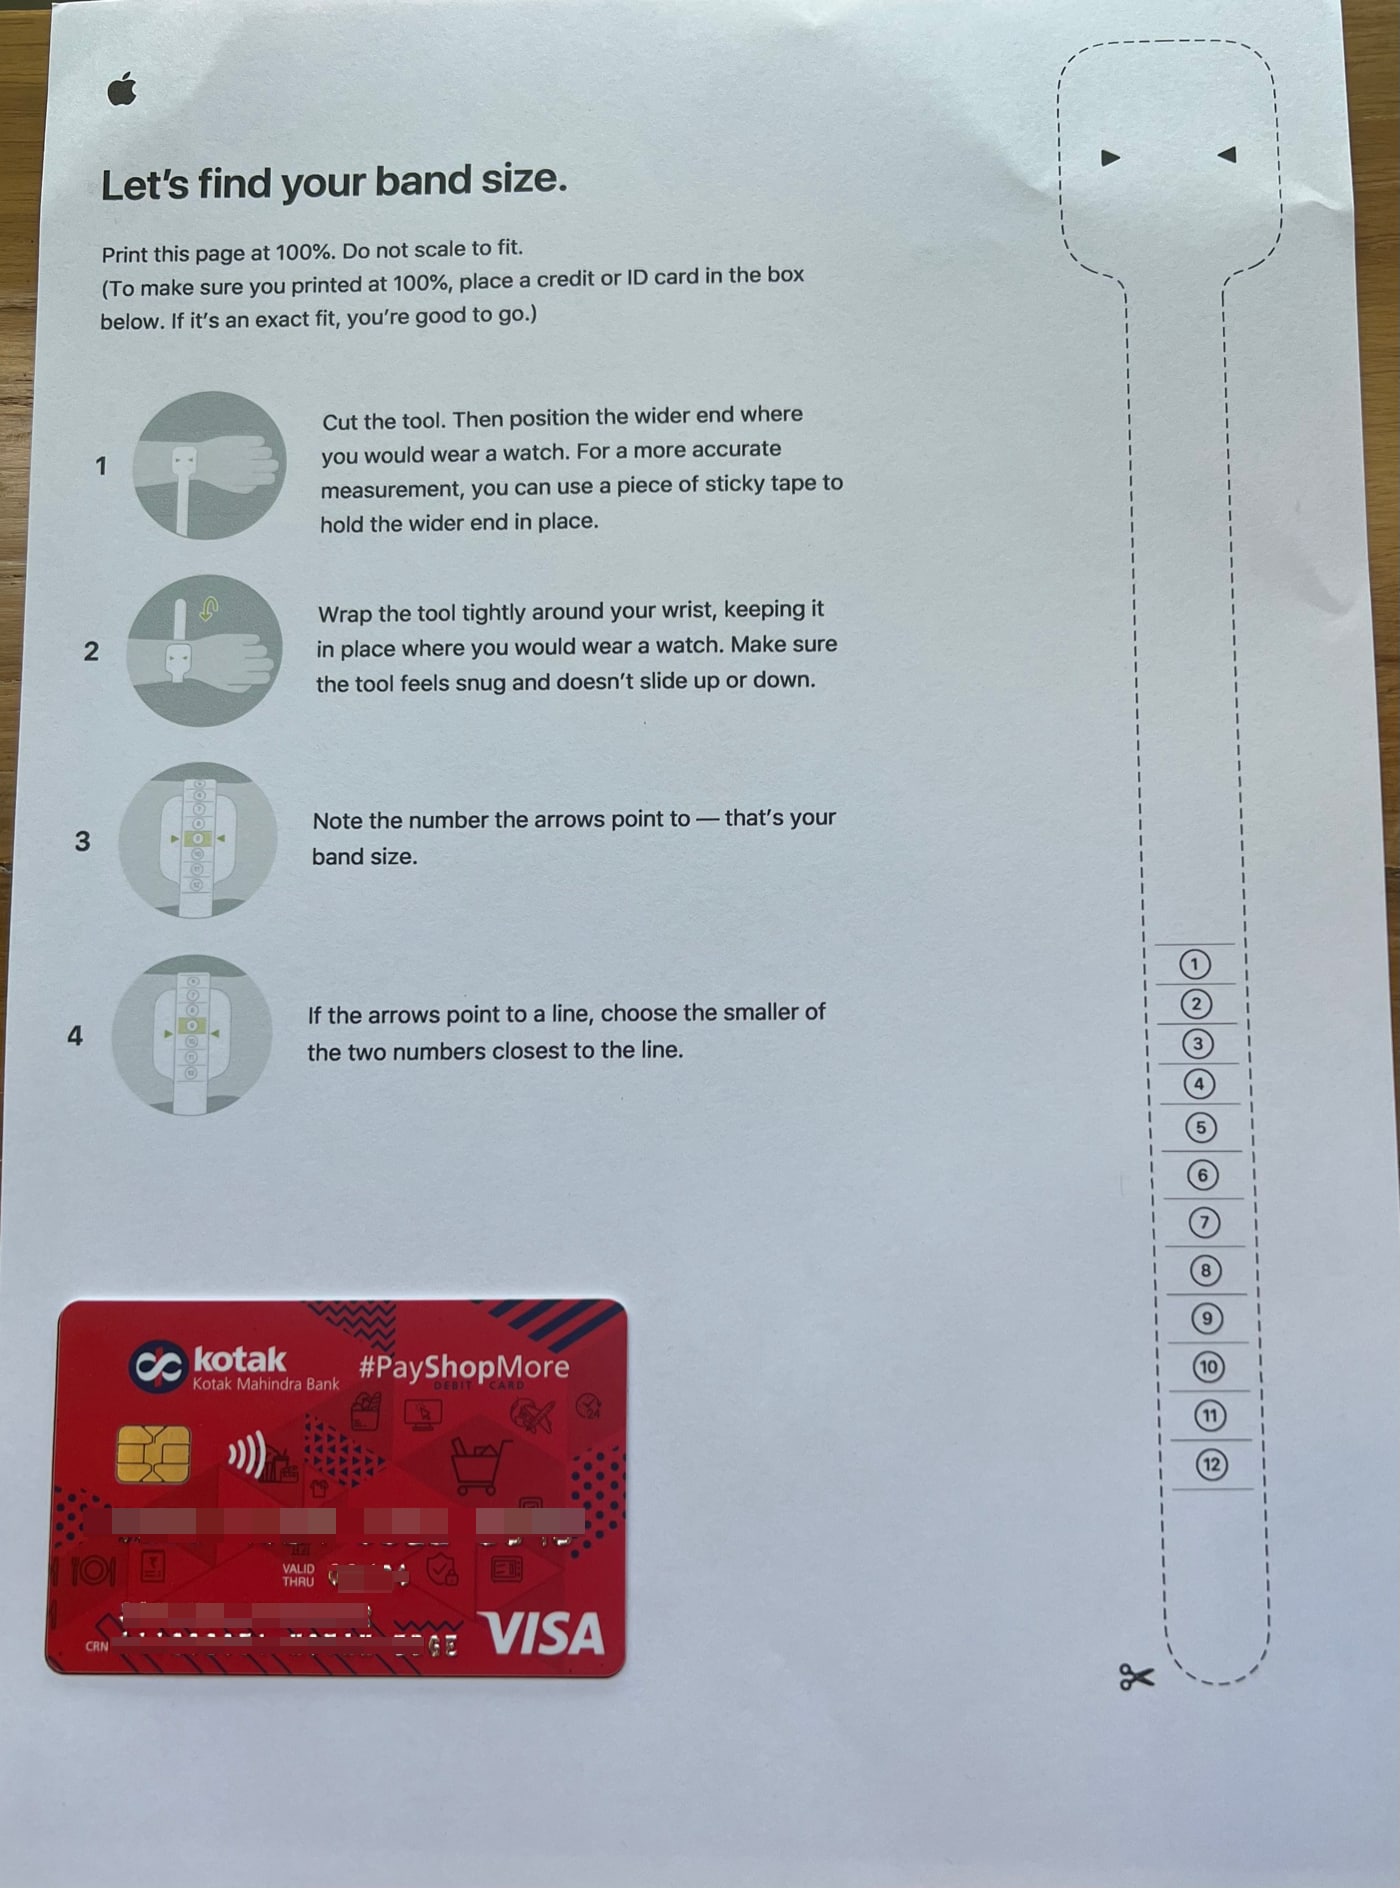 Verify the print by holding a credit or ID card in the box